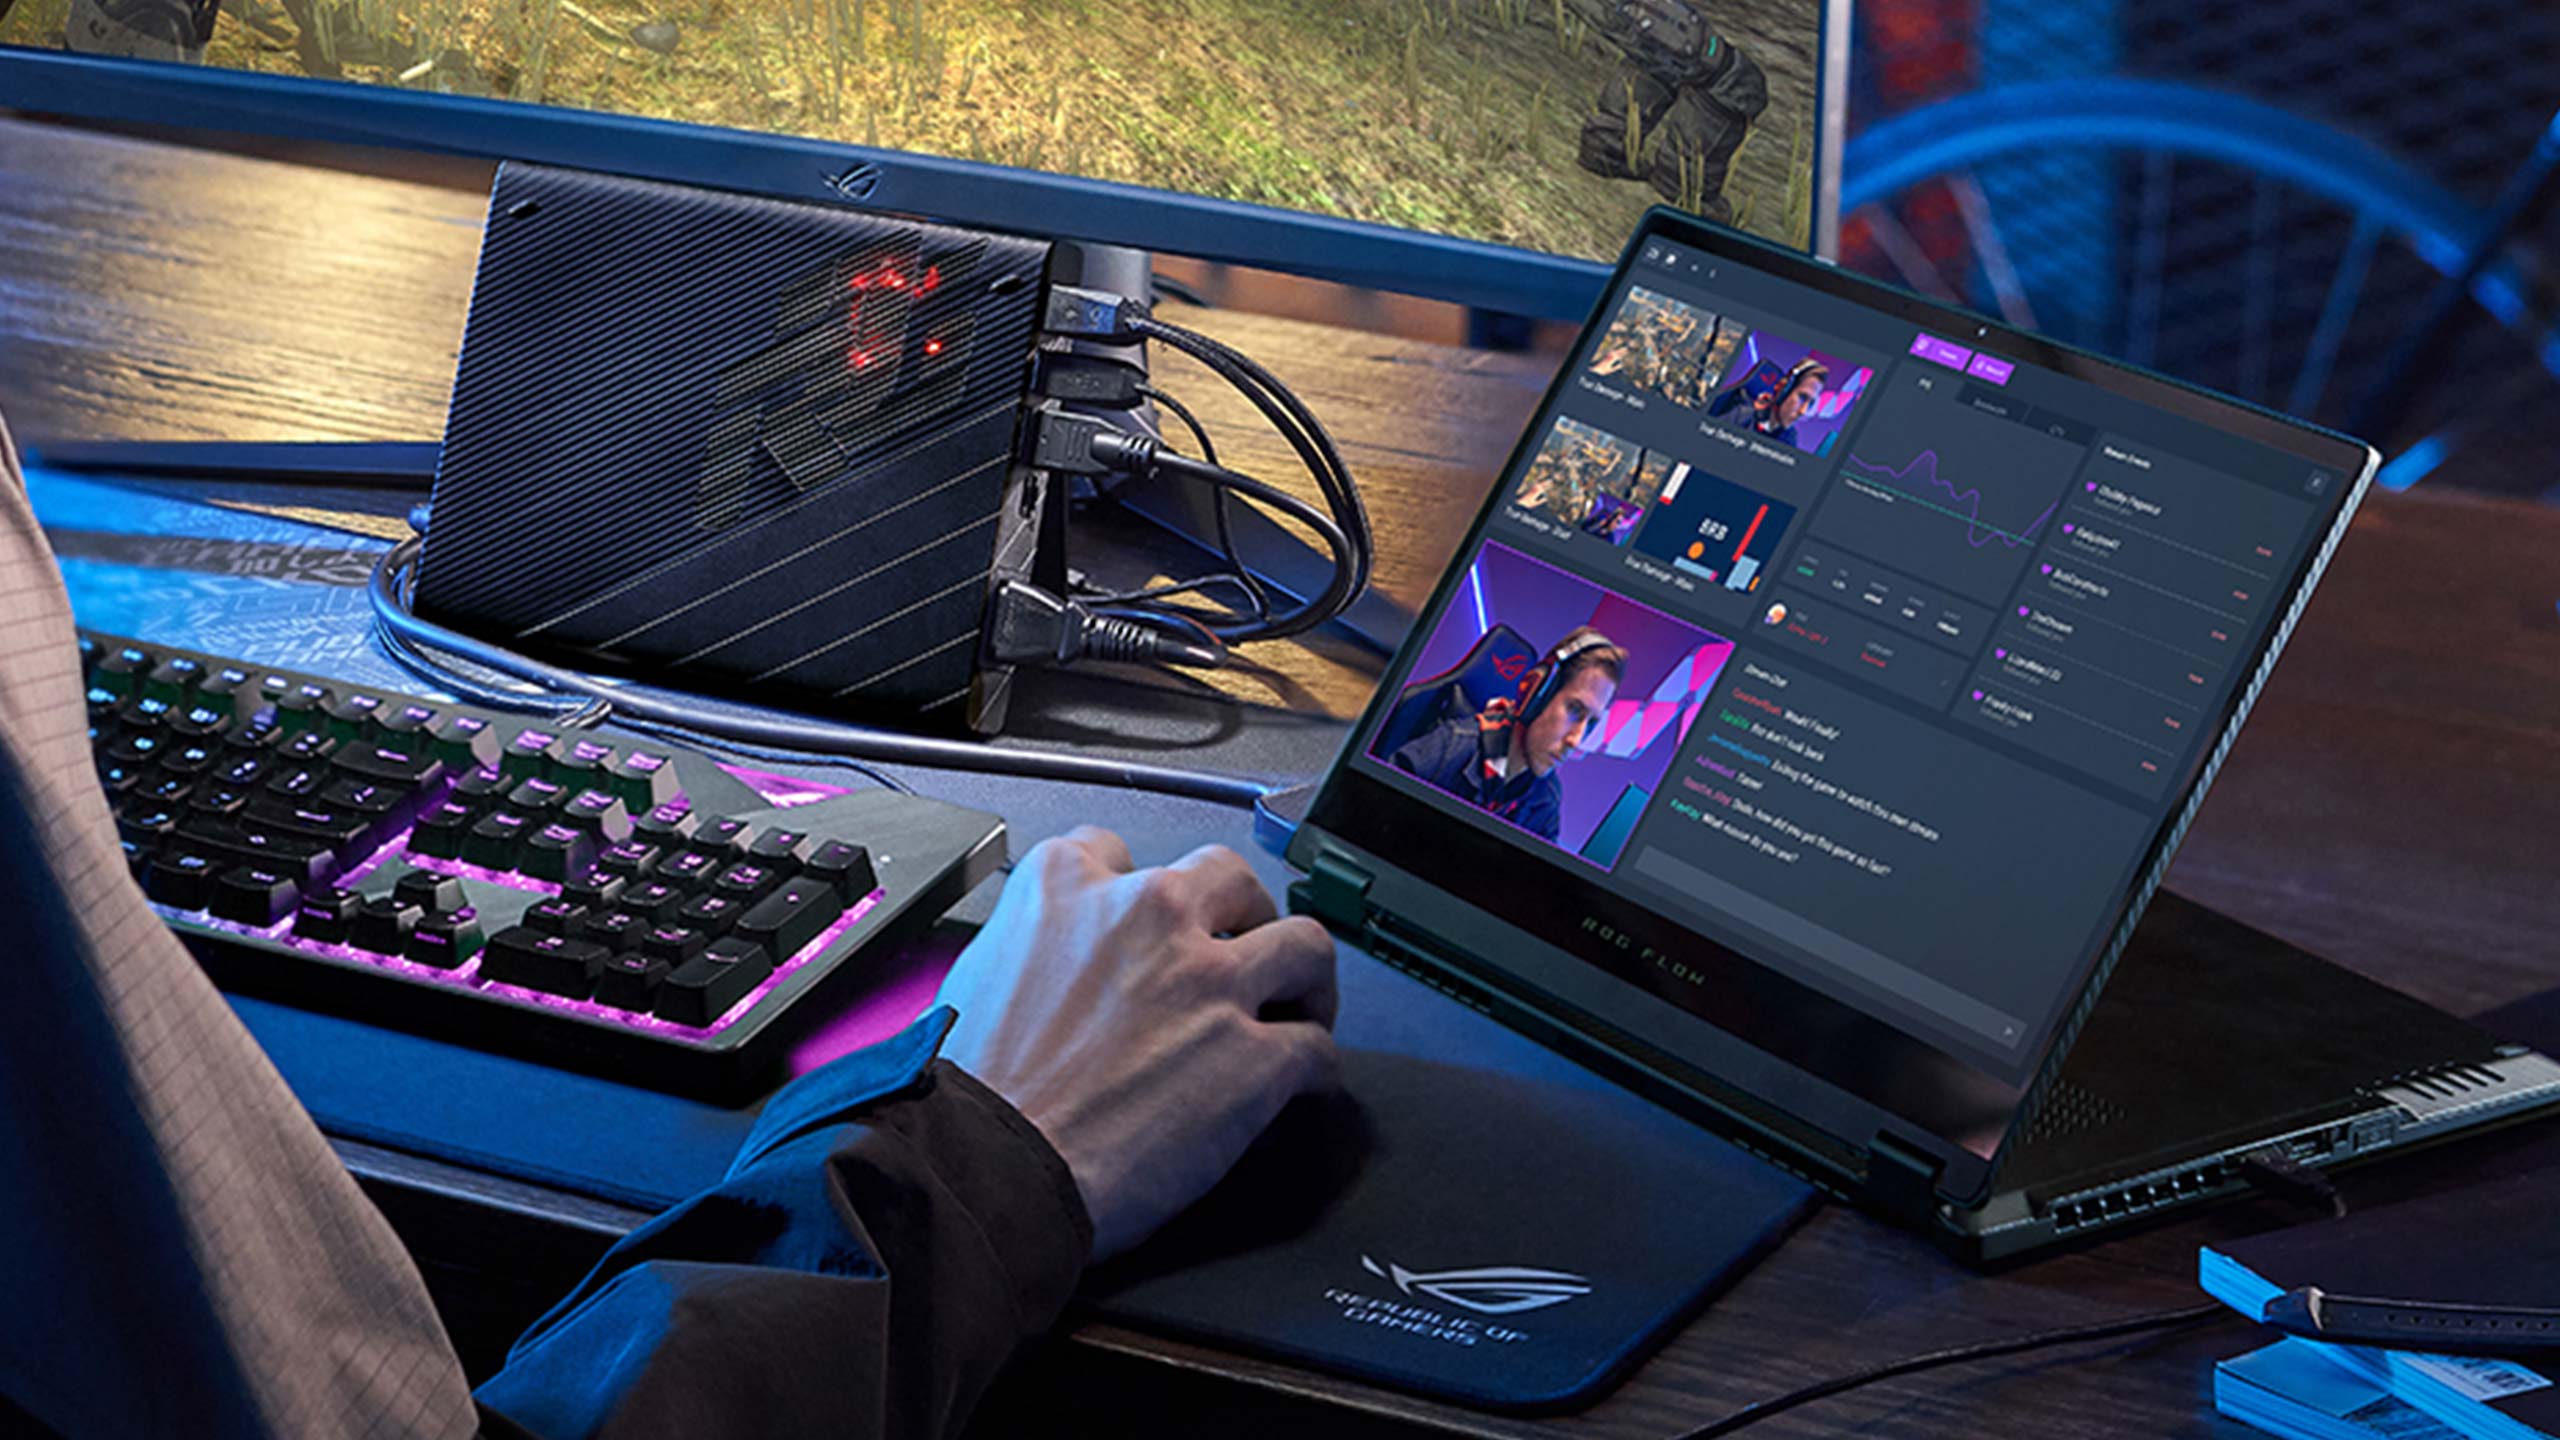 The best 2-in-1 laptop of CES 2021 could be a gaming revelation